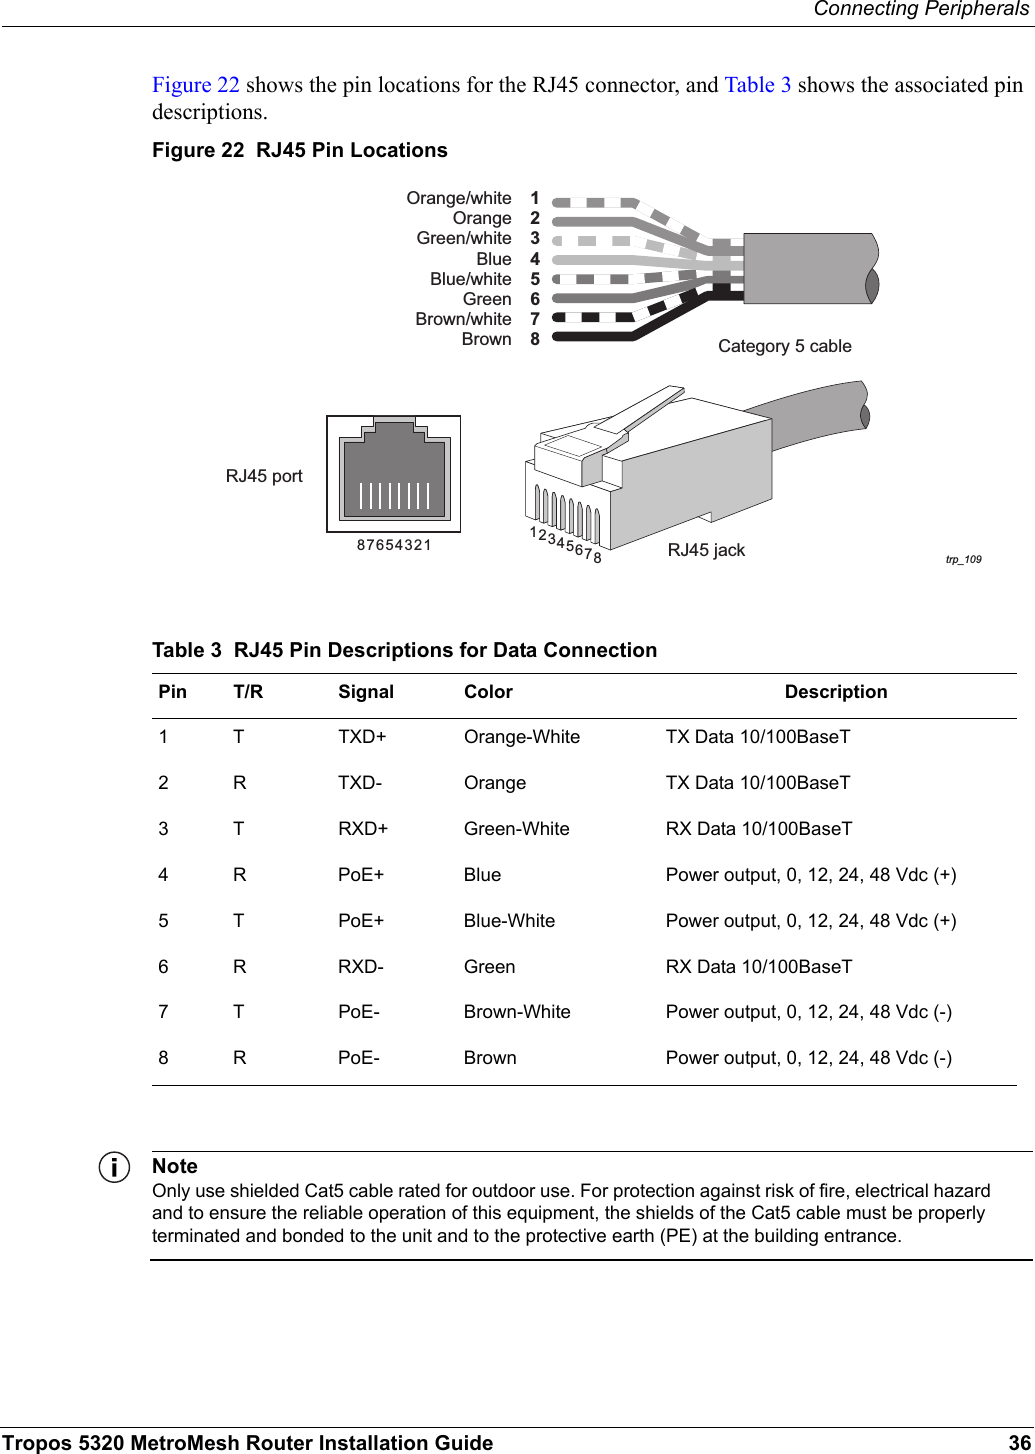 Connecting PeripheralsTropos 5320 MetroMesh Router Installation Guide 36Figure 22 shows the pin locations for the RJ45 connector, and Table 3 shows the associated pin descriptions. Figure 22  RJ45 Pin LocationsNoteOnly use shielded Cat5 cable rated for outdoor use. For protection against risk of fire, electrical hazard and to ensure the reliable operation of this equipment, the shields of the Cat5 cable must be properly terminated and bonded to the unit and to the protective earth (PE) at the building entrance.Table 3  RJ45 Pin Descriptions for Data ConnectionPin T/R Signal Color Description1 T TXD+ Orange-White TX Data 10/100BaseT2 R TXD- Orange TX Data 10/100BaseT3 T RXD+ Green-White RX Data 10/100BaseT4 R PoE+ Blue Power output, 0, 12, 24, 48 Vdc (+)5 T PoE+ Blue-White Power output, 0, 12, 24, 48 Vdc (+)6 R RXD- Green RX Data 10/100BaseT7 T PoE- Brown-White Power output, 0, 12, 24, 48 Vdc (-)8 R PoE- Brown Power output, 0, 12, 24, 48 Vdc (-)trp_109Category 5 cableRJ45 portRJ45 jack81234567BrownOrange/whiteOrangeGreen/whiteBlueBlue/whiteGreenBrown/white18765432 76854321